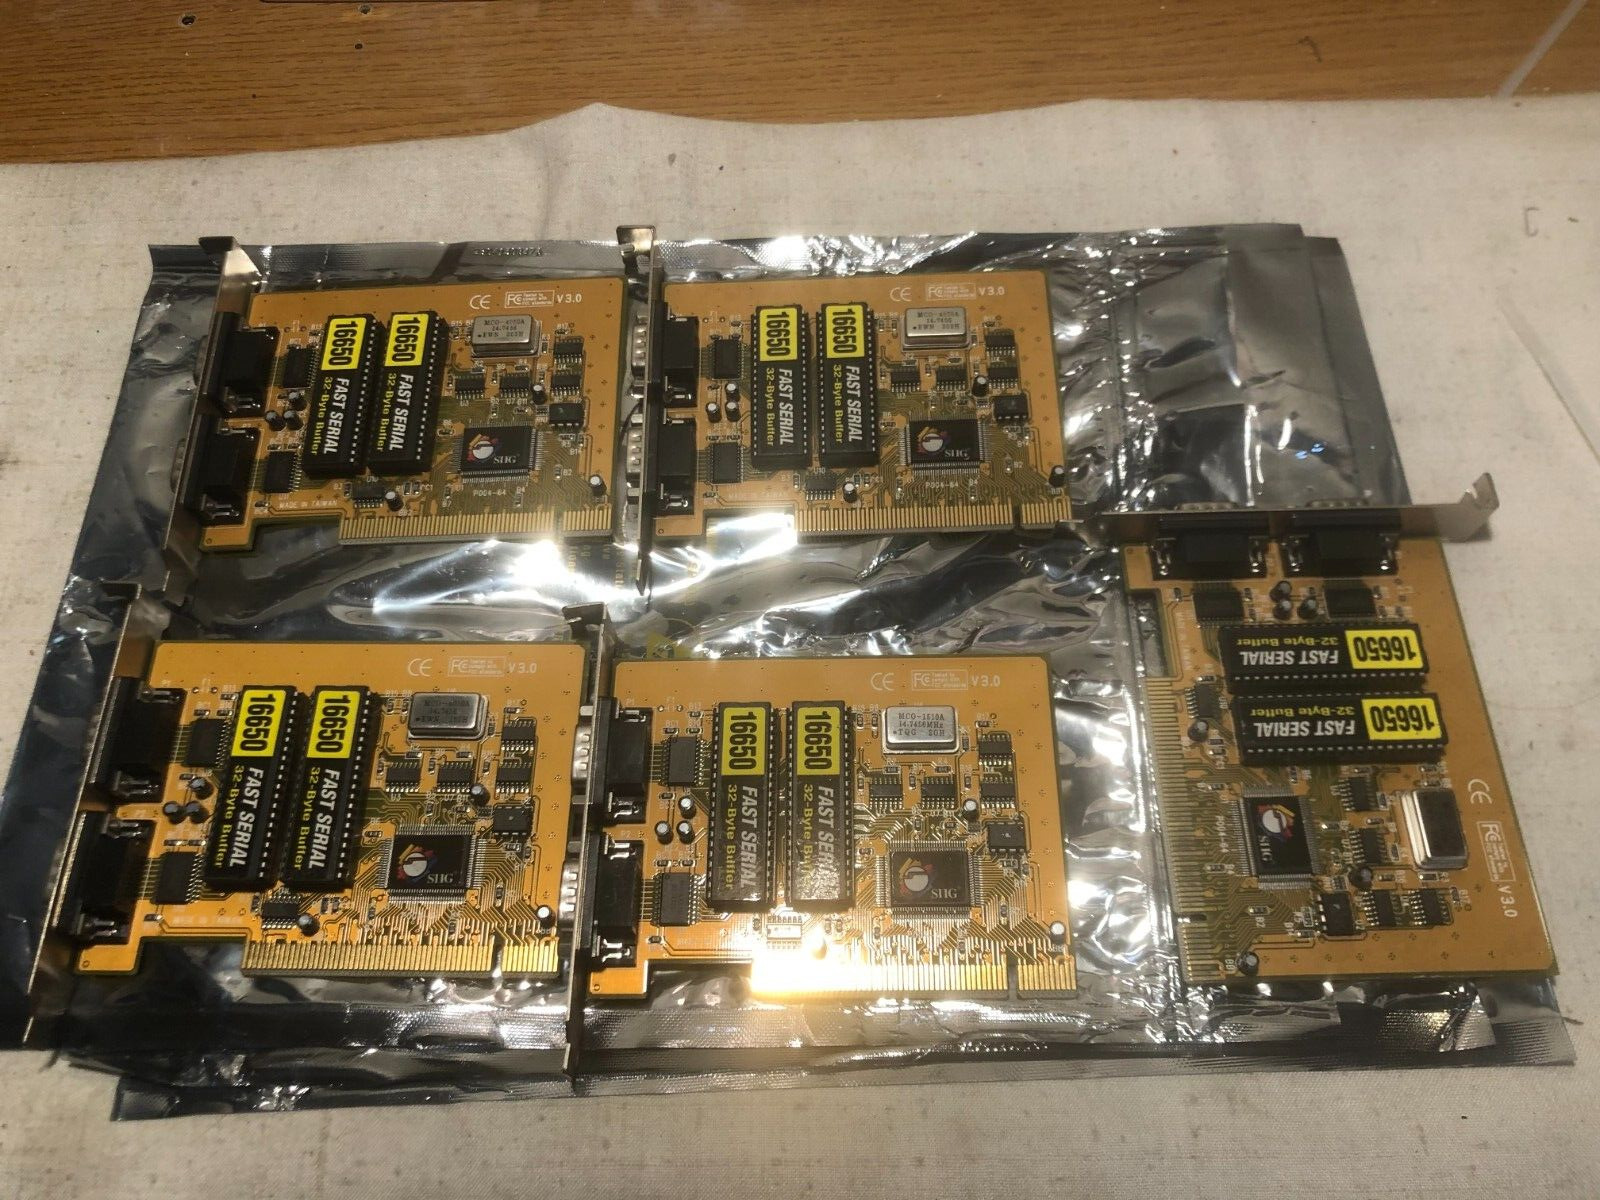 LOT OF 5 SIIG JJ-P02012 V 3.0 Dual Port Serial RS-232 PCI Fast Serial Adapter